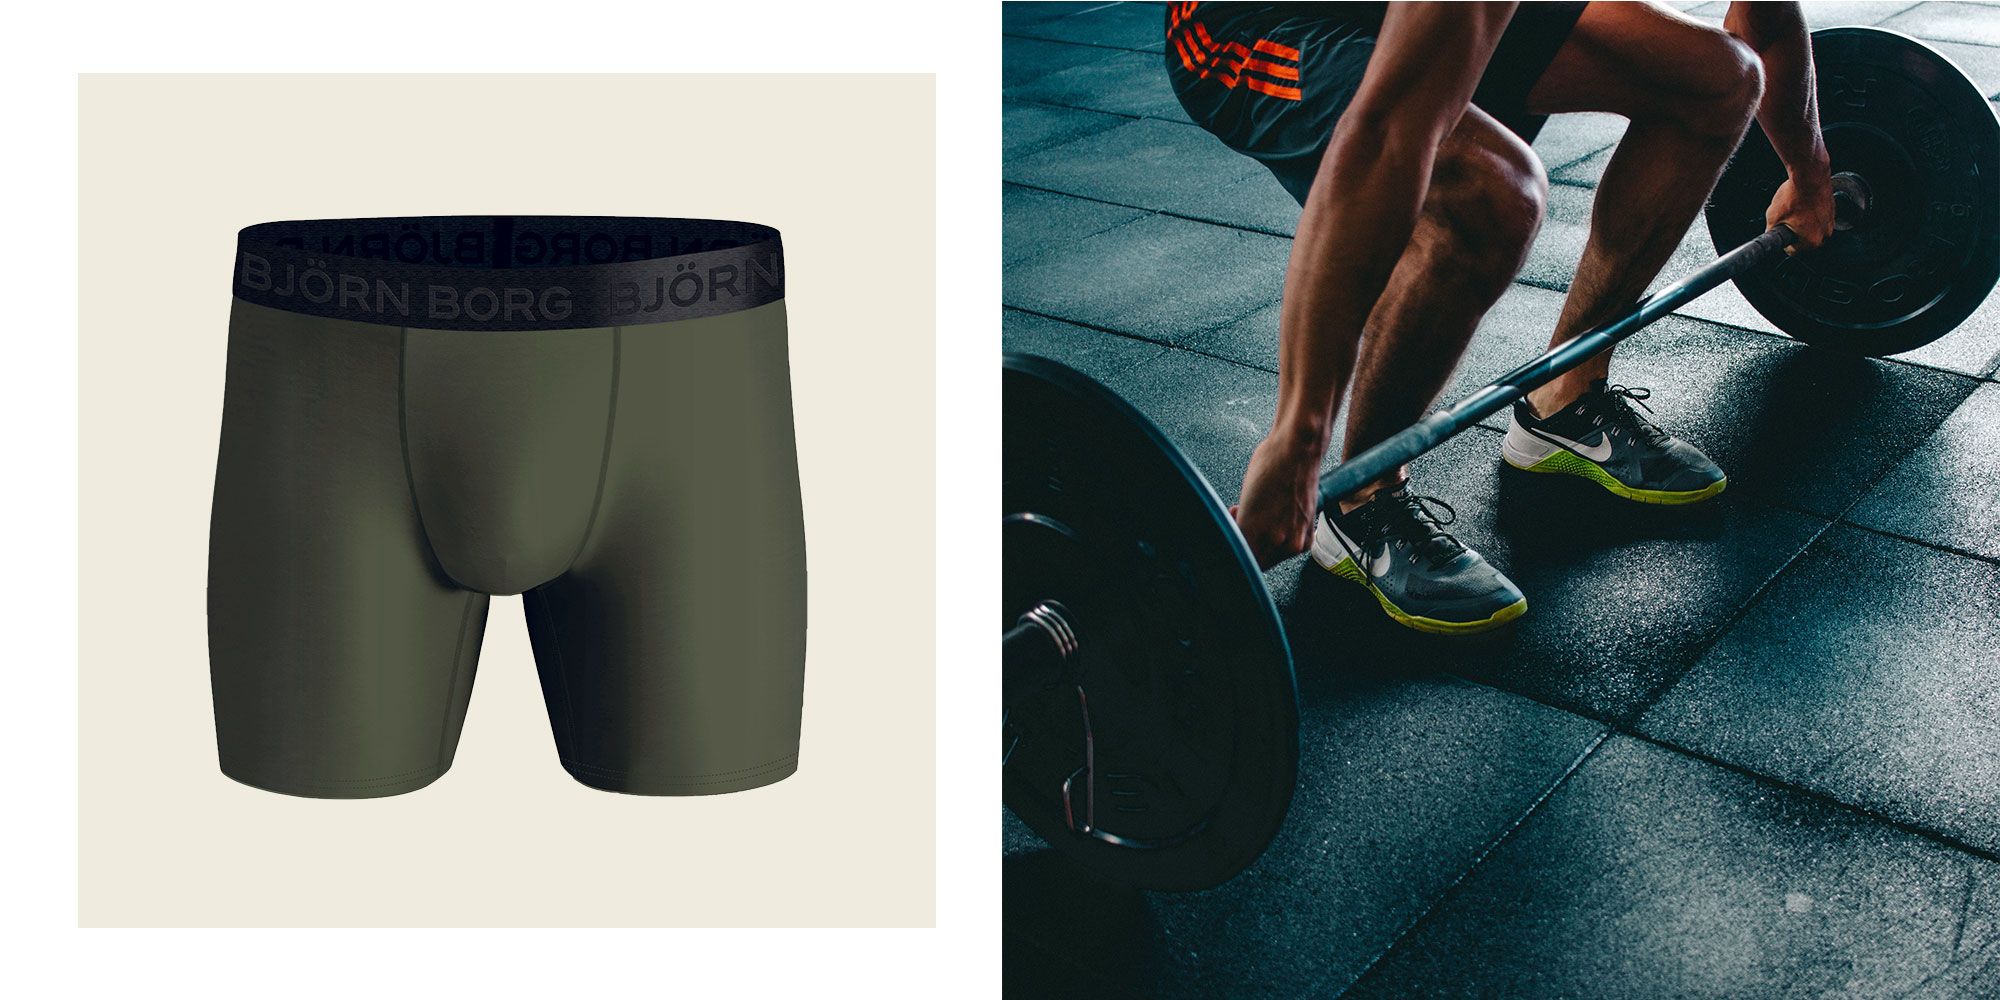 The Best Men's Sports Underwear for Working Out and Staying